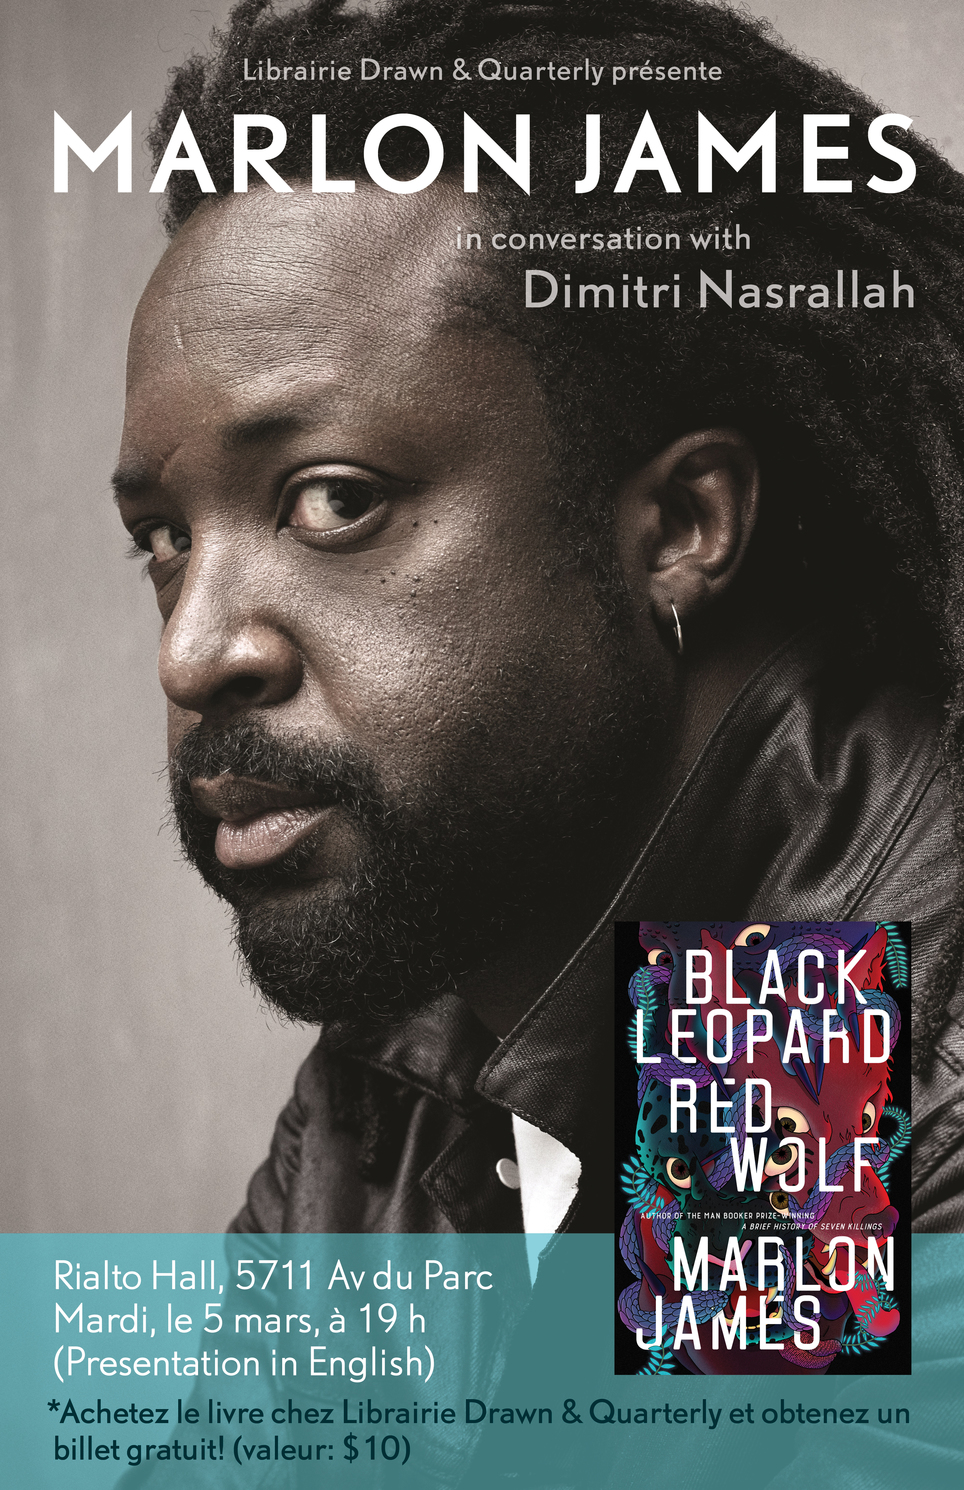 Marlon James launches BLACK LEOPARD, RED WOLF